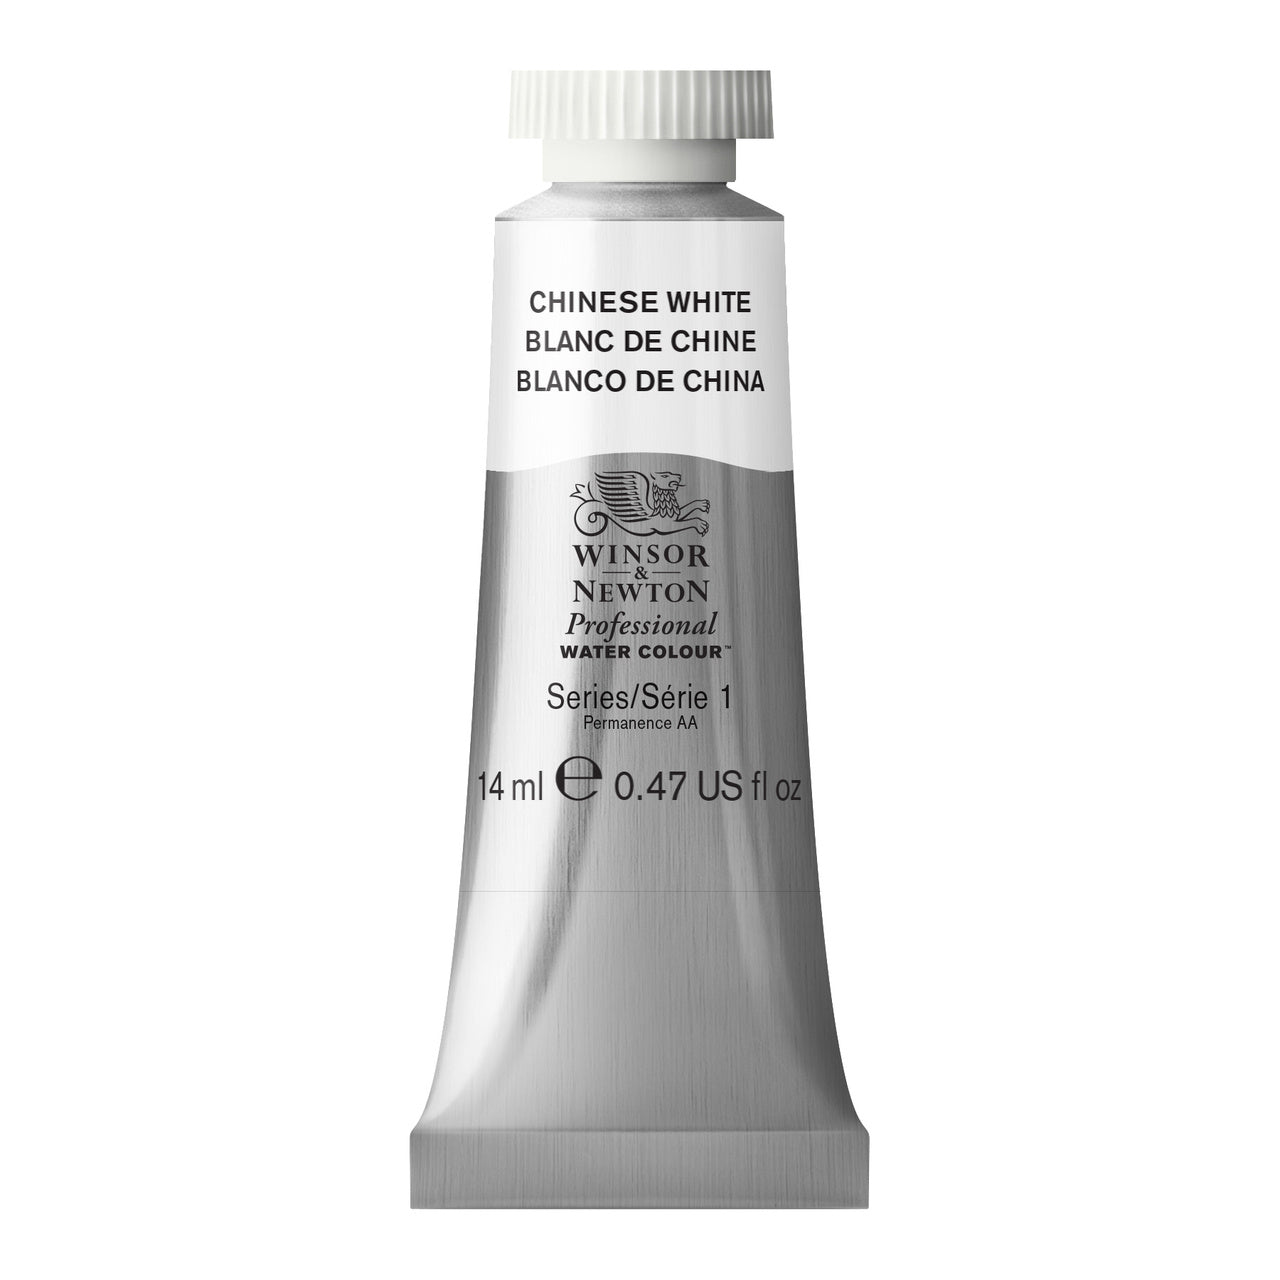 Winsor & Newton Professional Watercolor Chinese White 14ml - merriartist.com